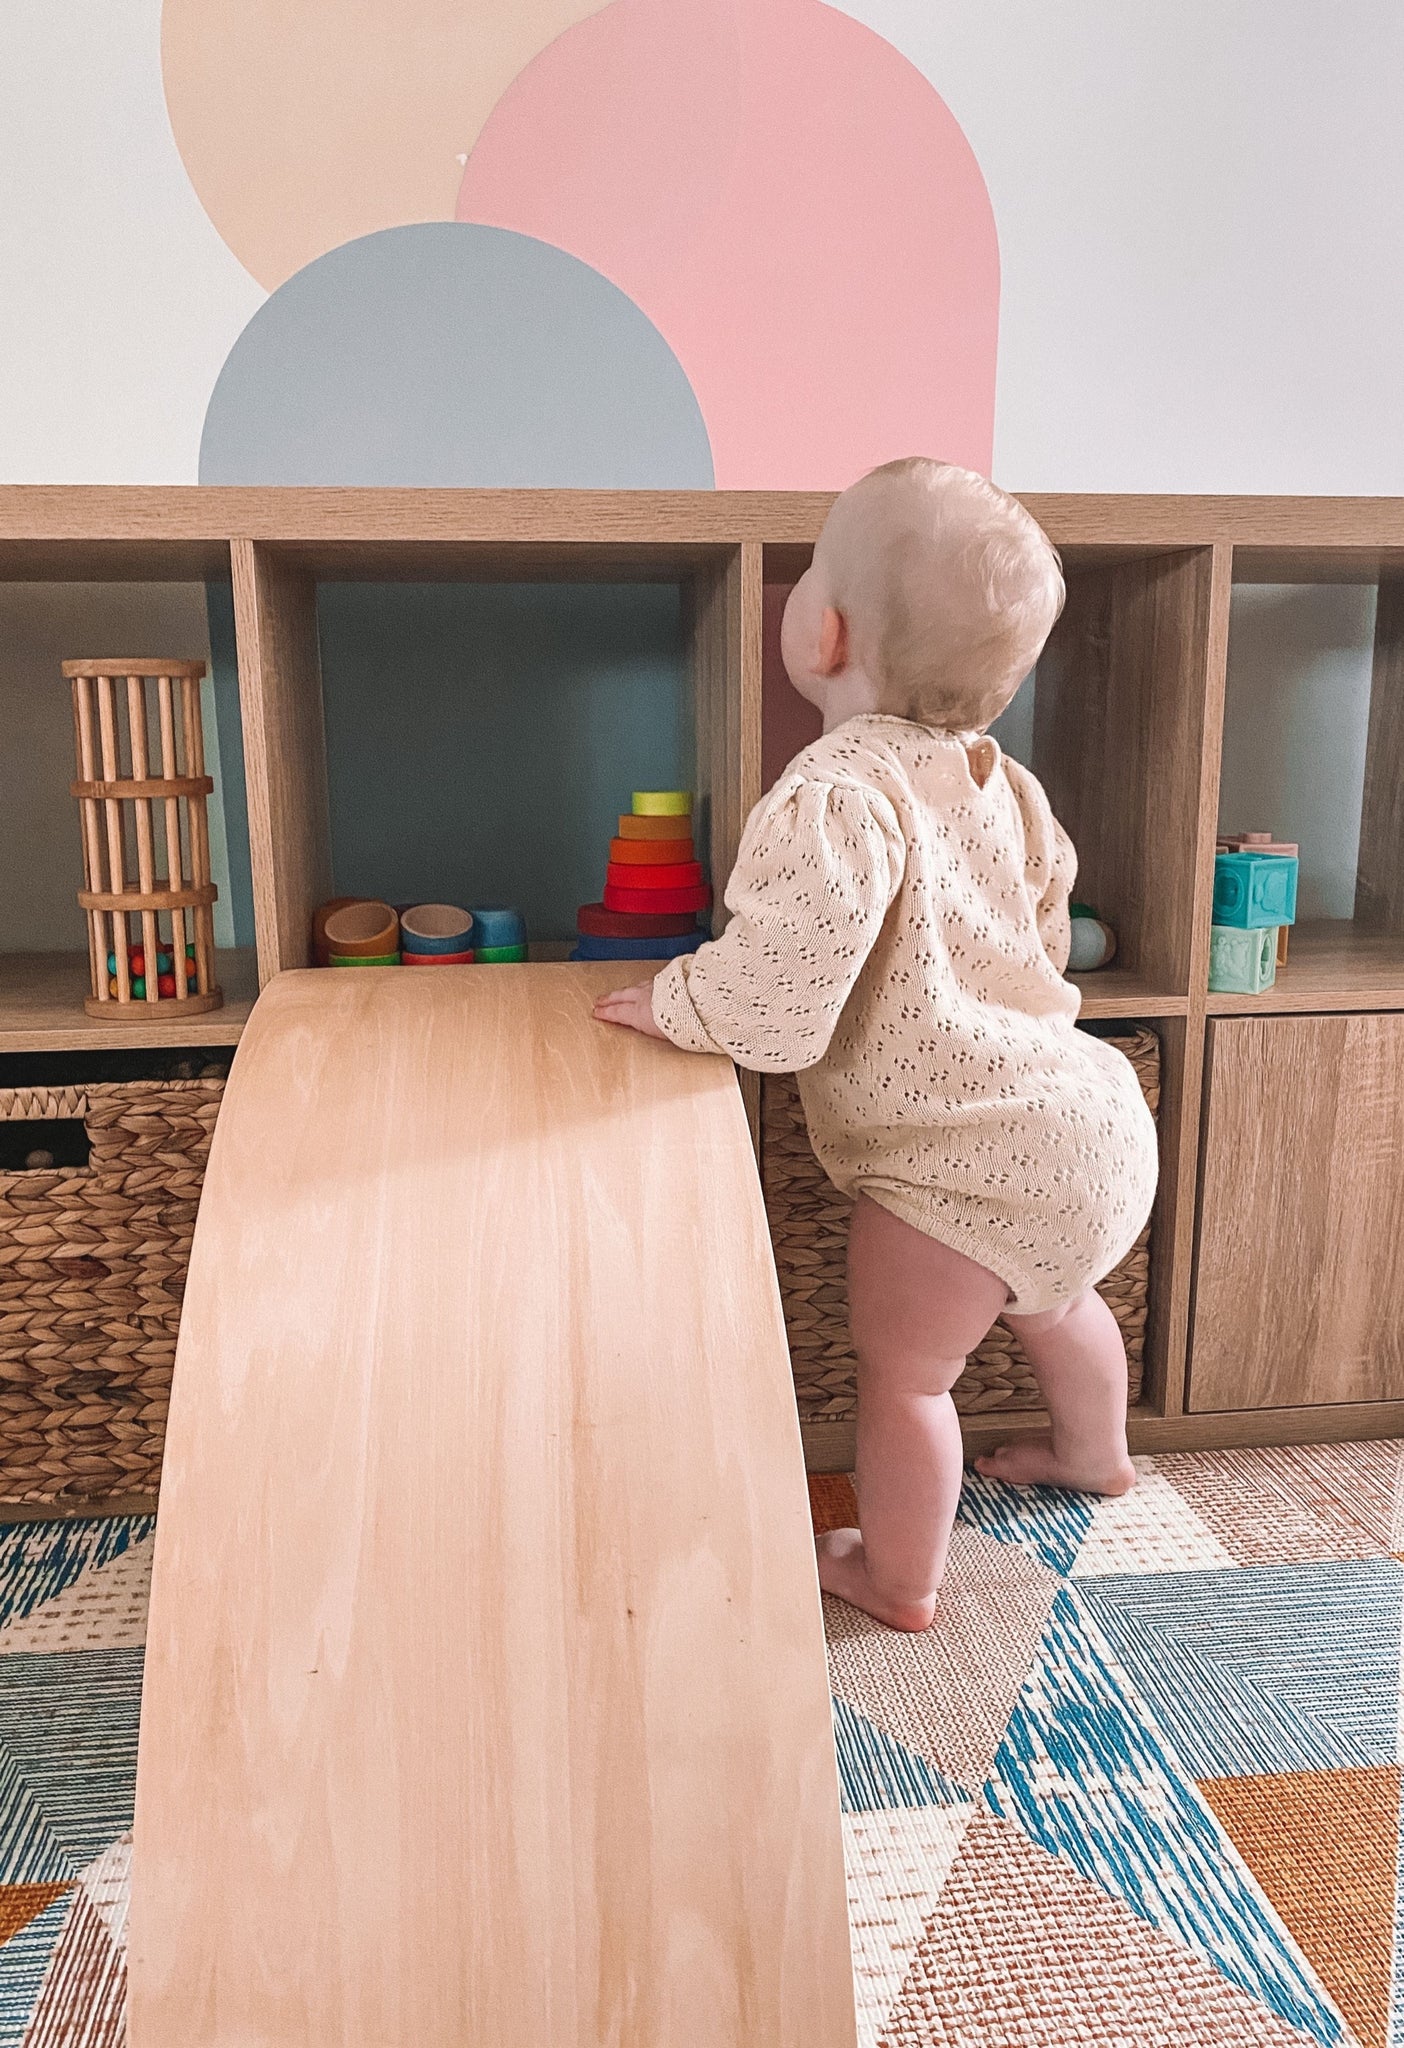 Rugabubs award winning soft foam padded play mats in both large and round sizes are the safest, Eco friendly, waterproof playmats available for your baby. Perfect as a nursery rug and as a tummy time playmat. 